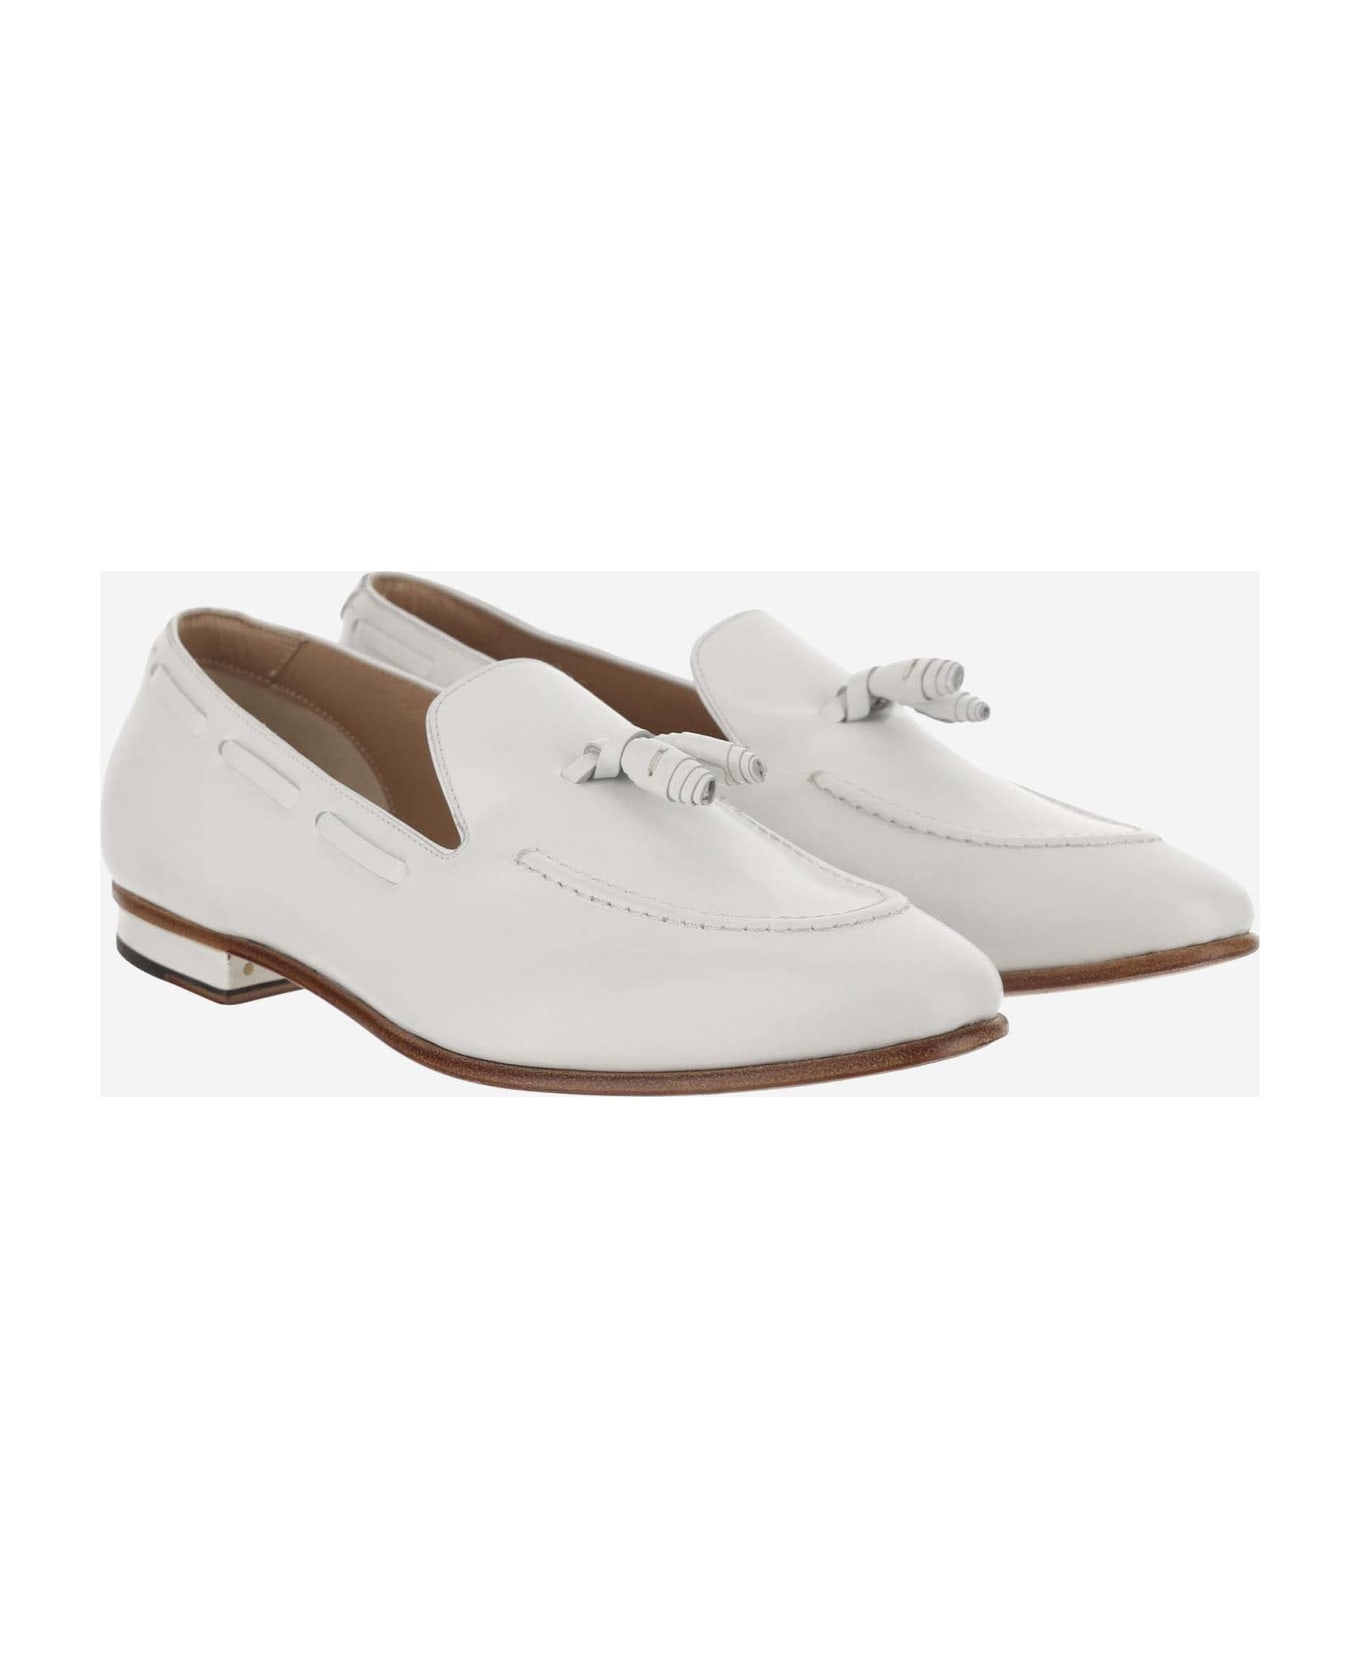 Francesco Russo Leather Moccasins - White